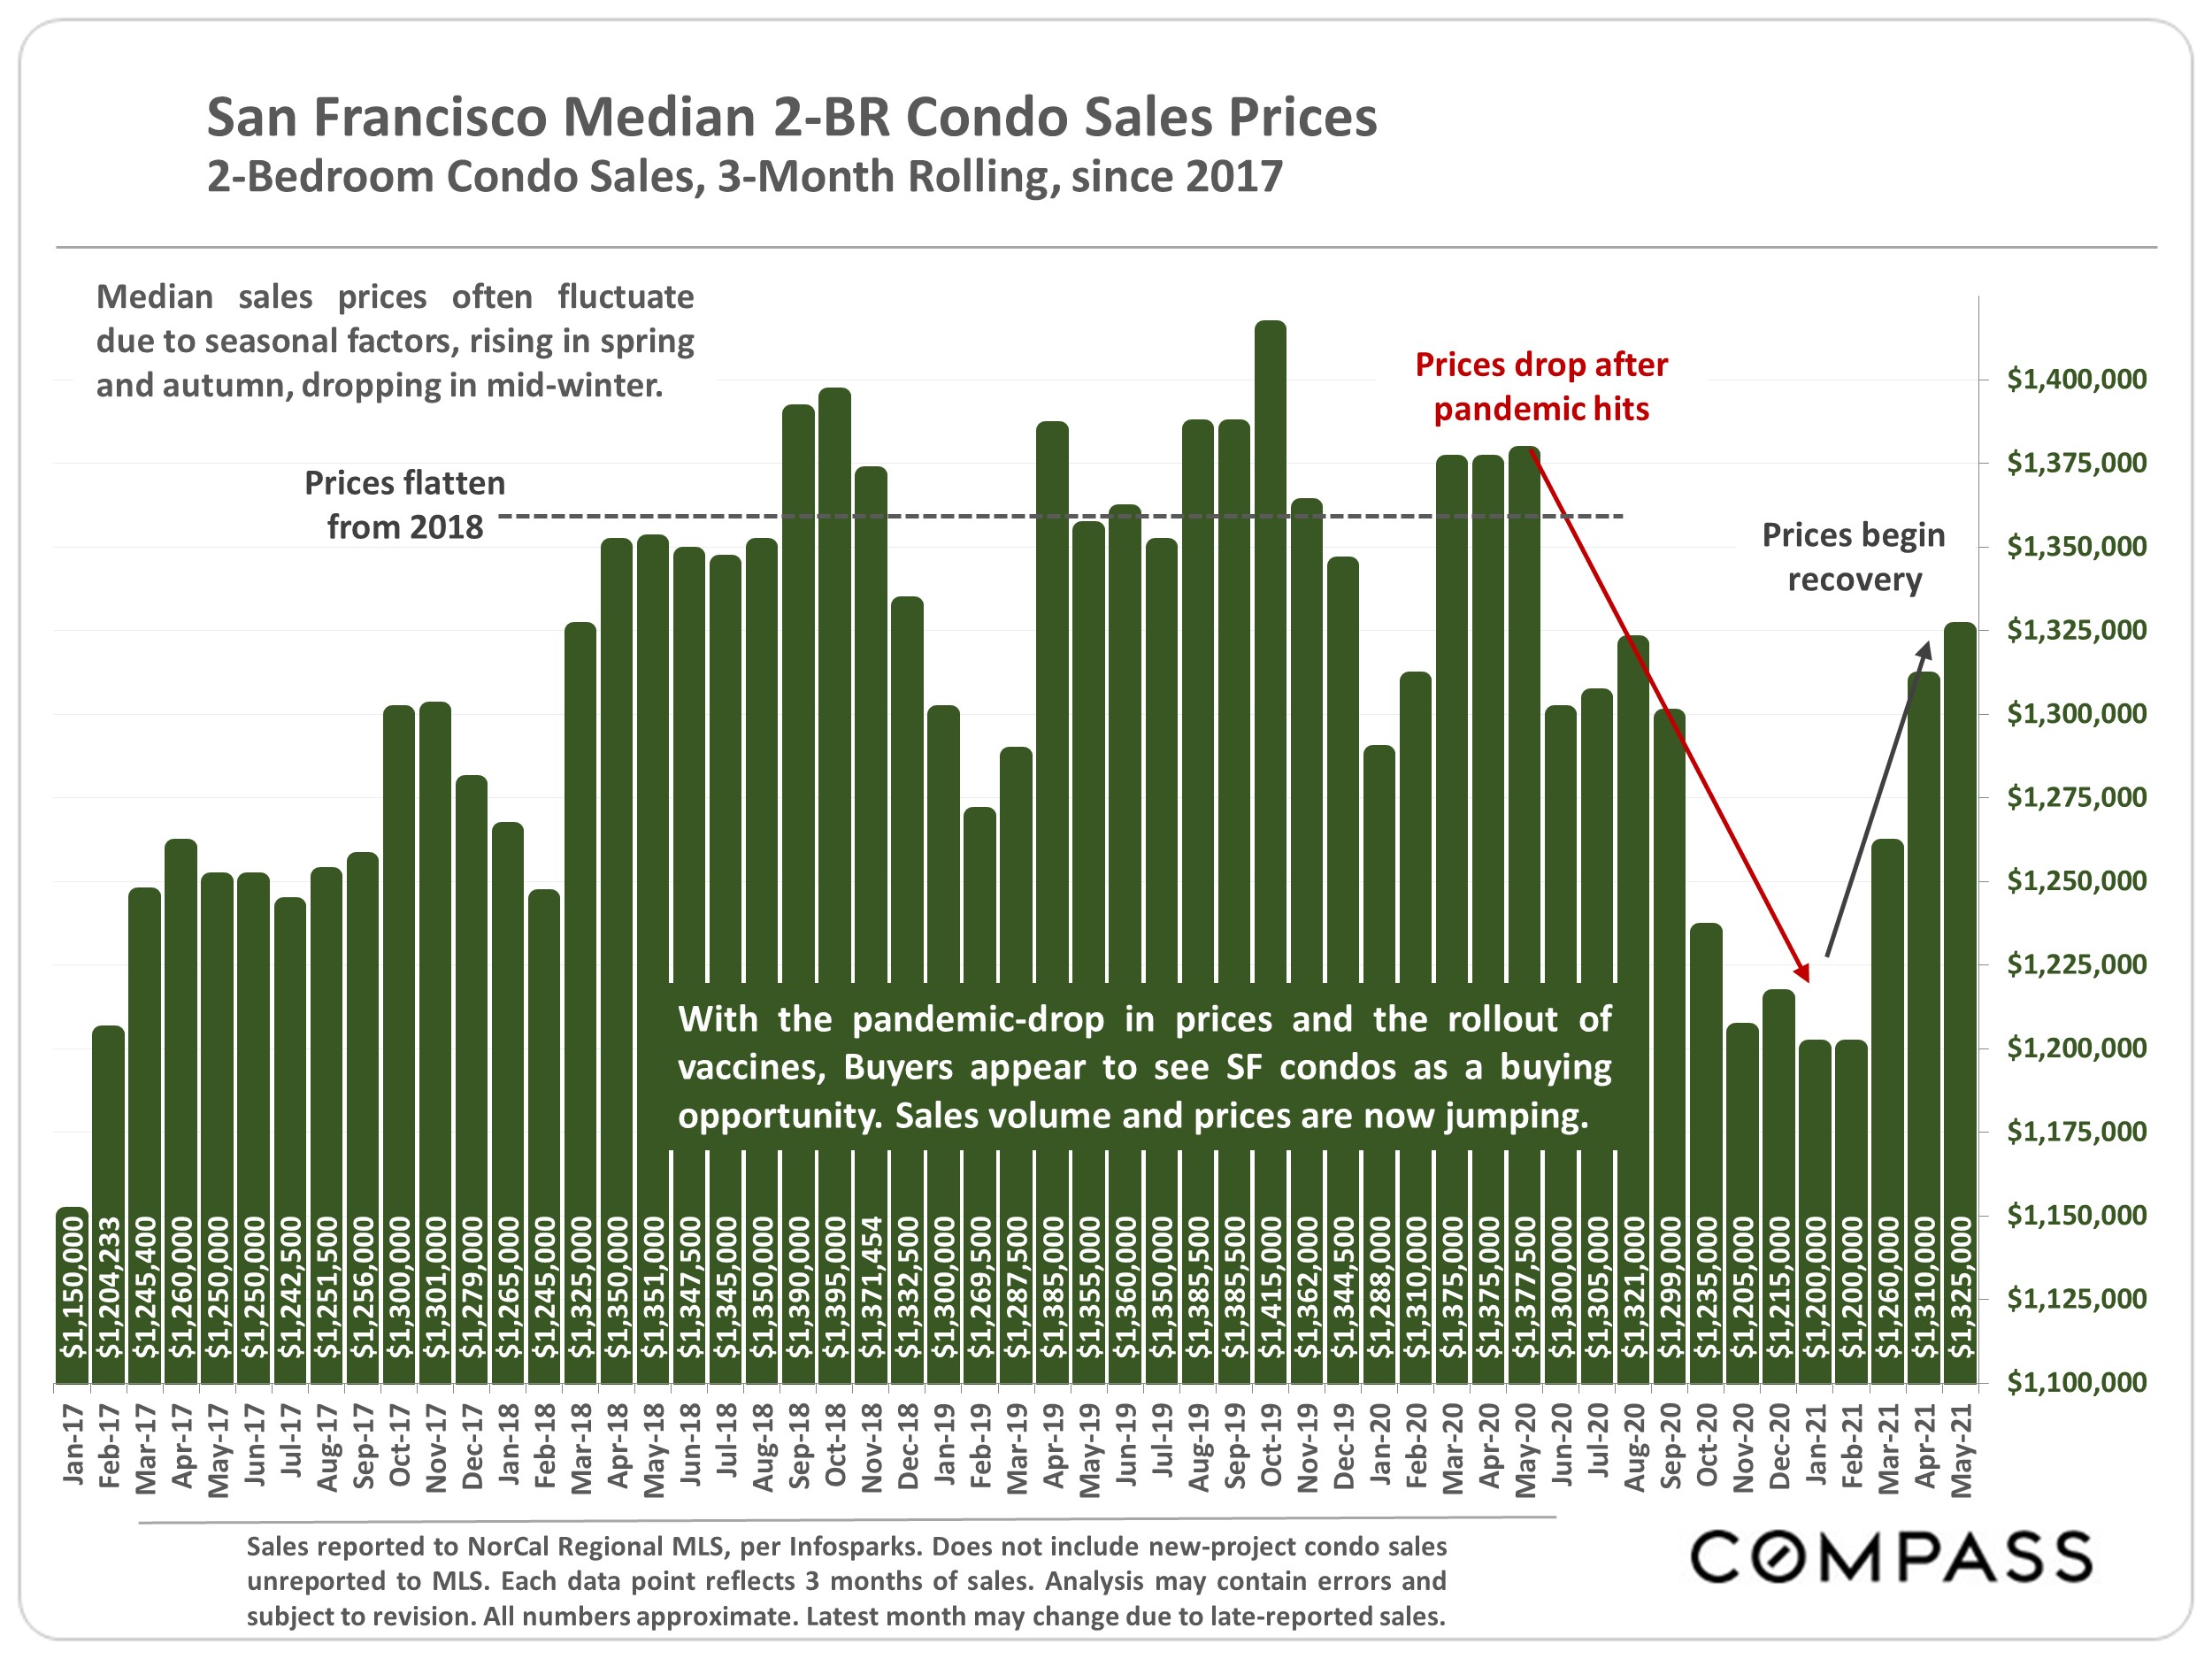 Chart showing the San Francisco Median 2-BR Condo Sales Prices, 2-0Bedroom Condo sales, 3-Month Rolling, since 2017